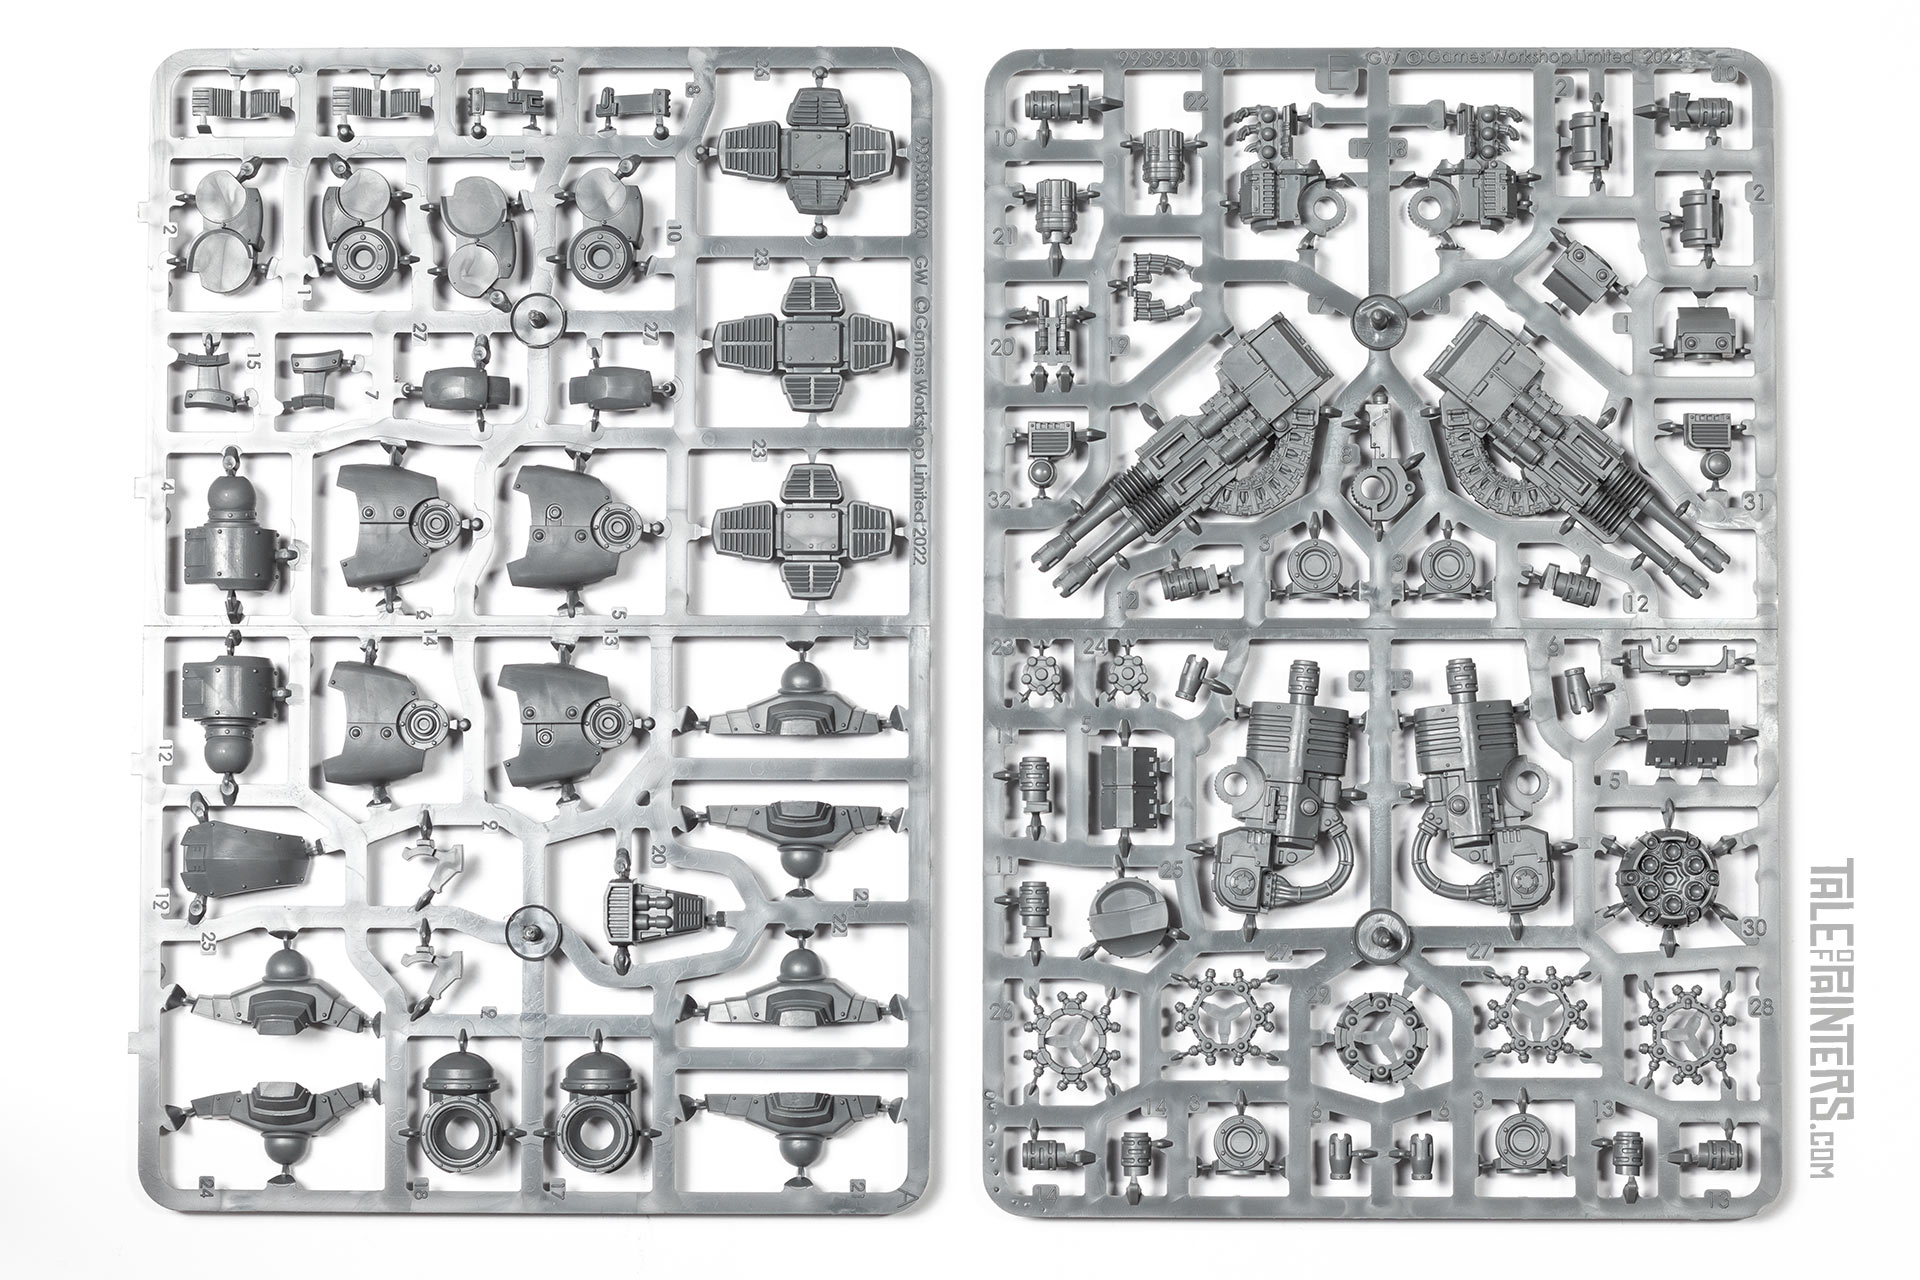 Leviathan Siege Dreadnought with ranged weapons legs and weapons sprues